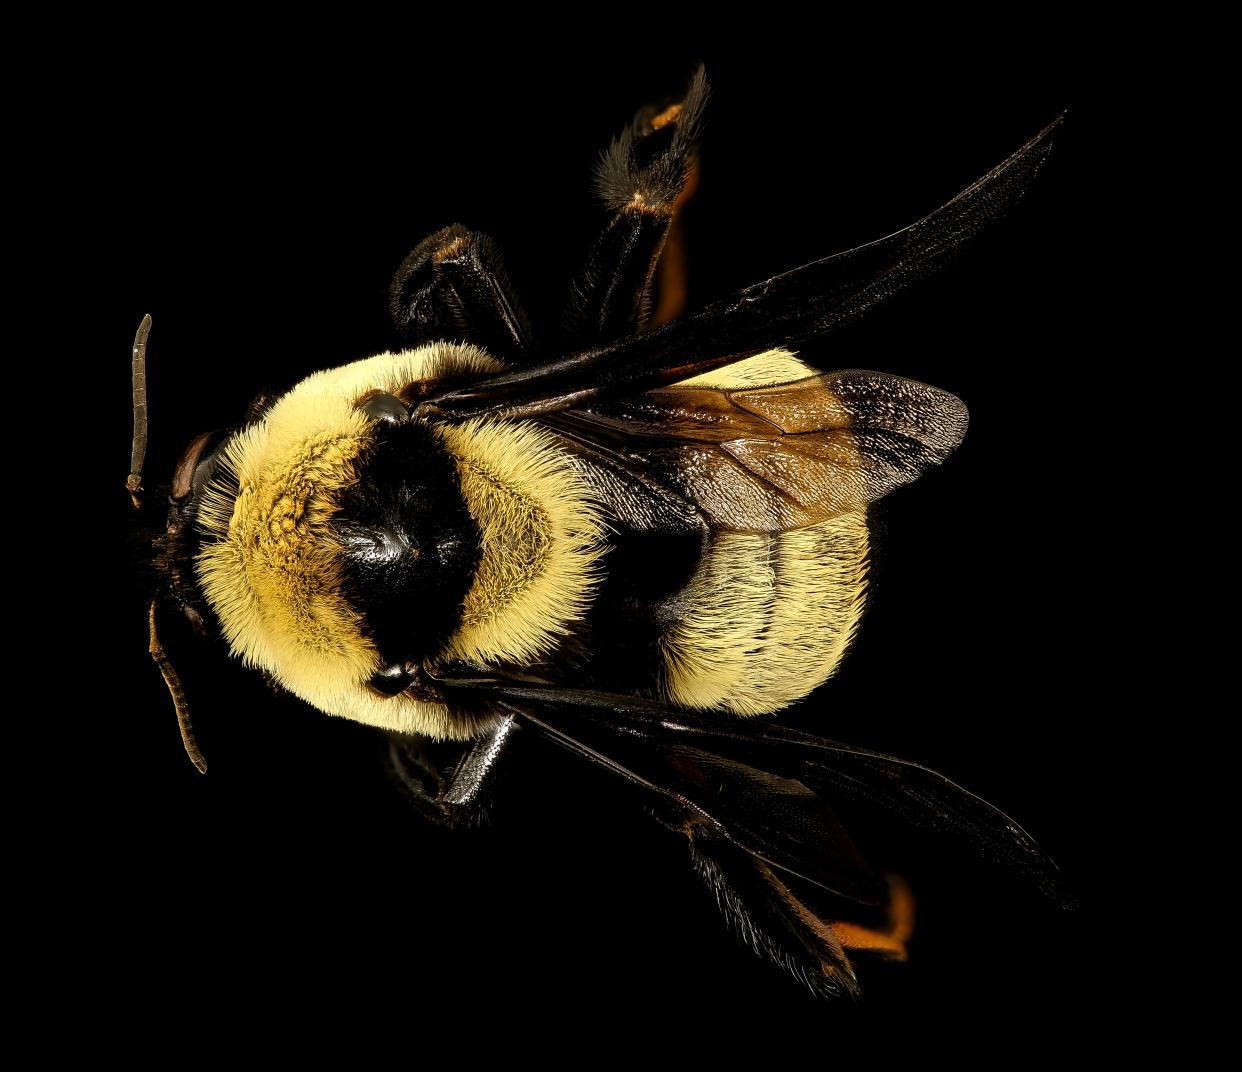 The Southern Plains bumble bee may soon be listed under the Endangered Species Act.